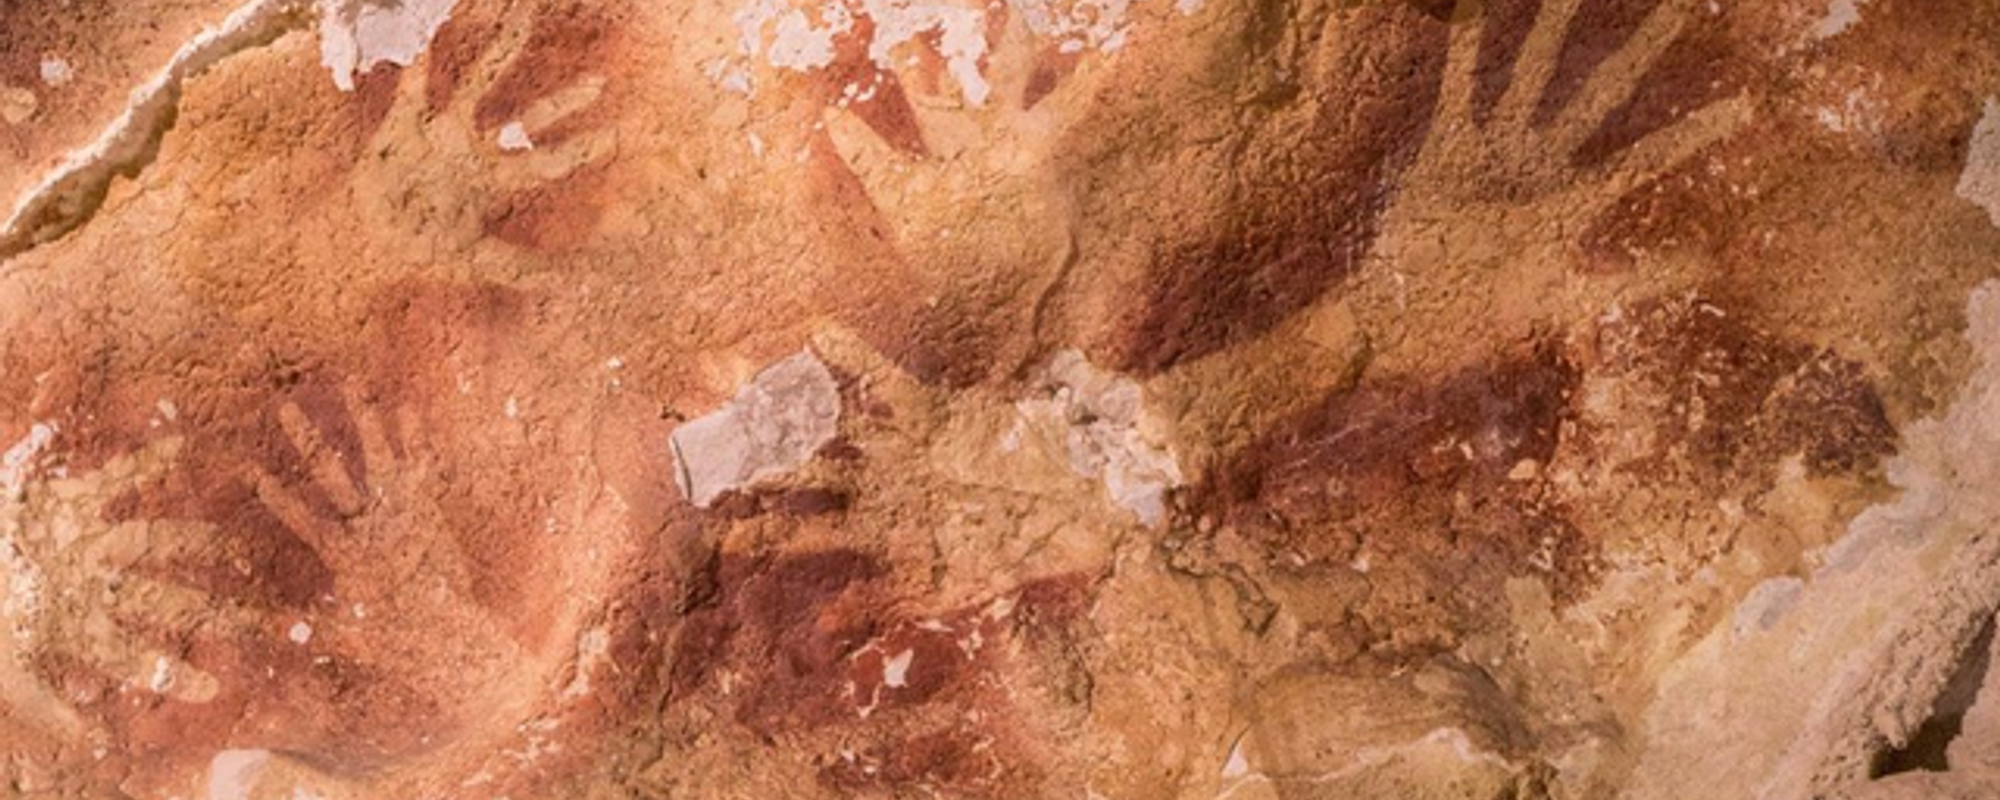 ANCIENT ROCK ART | The Creative Impulse That Connects All Humans | Native American Pictograph Panel